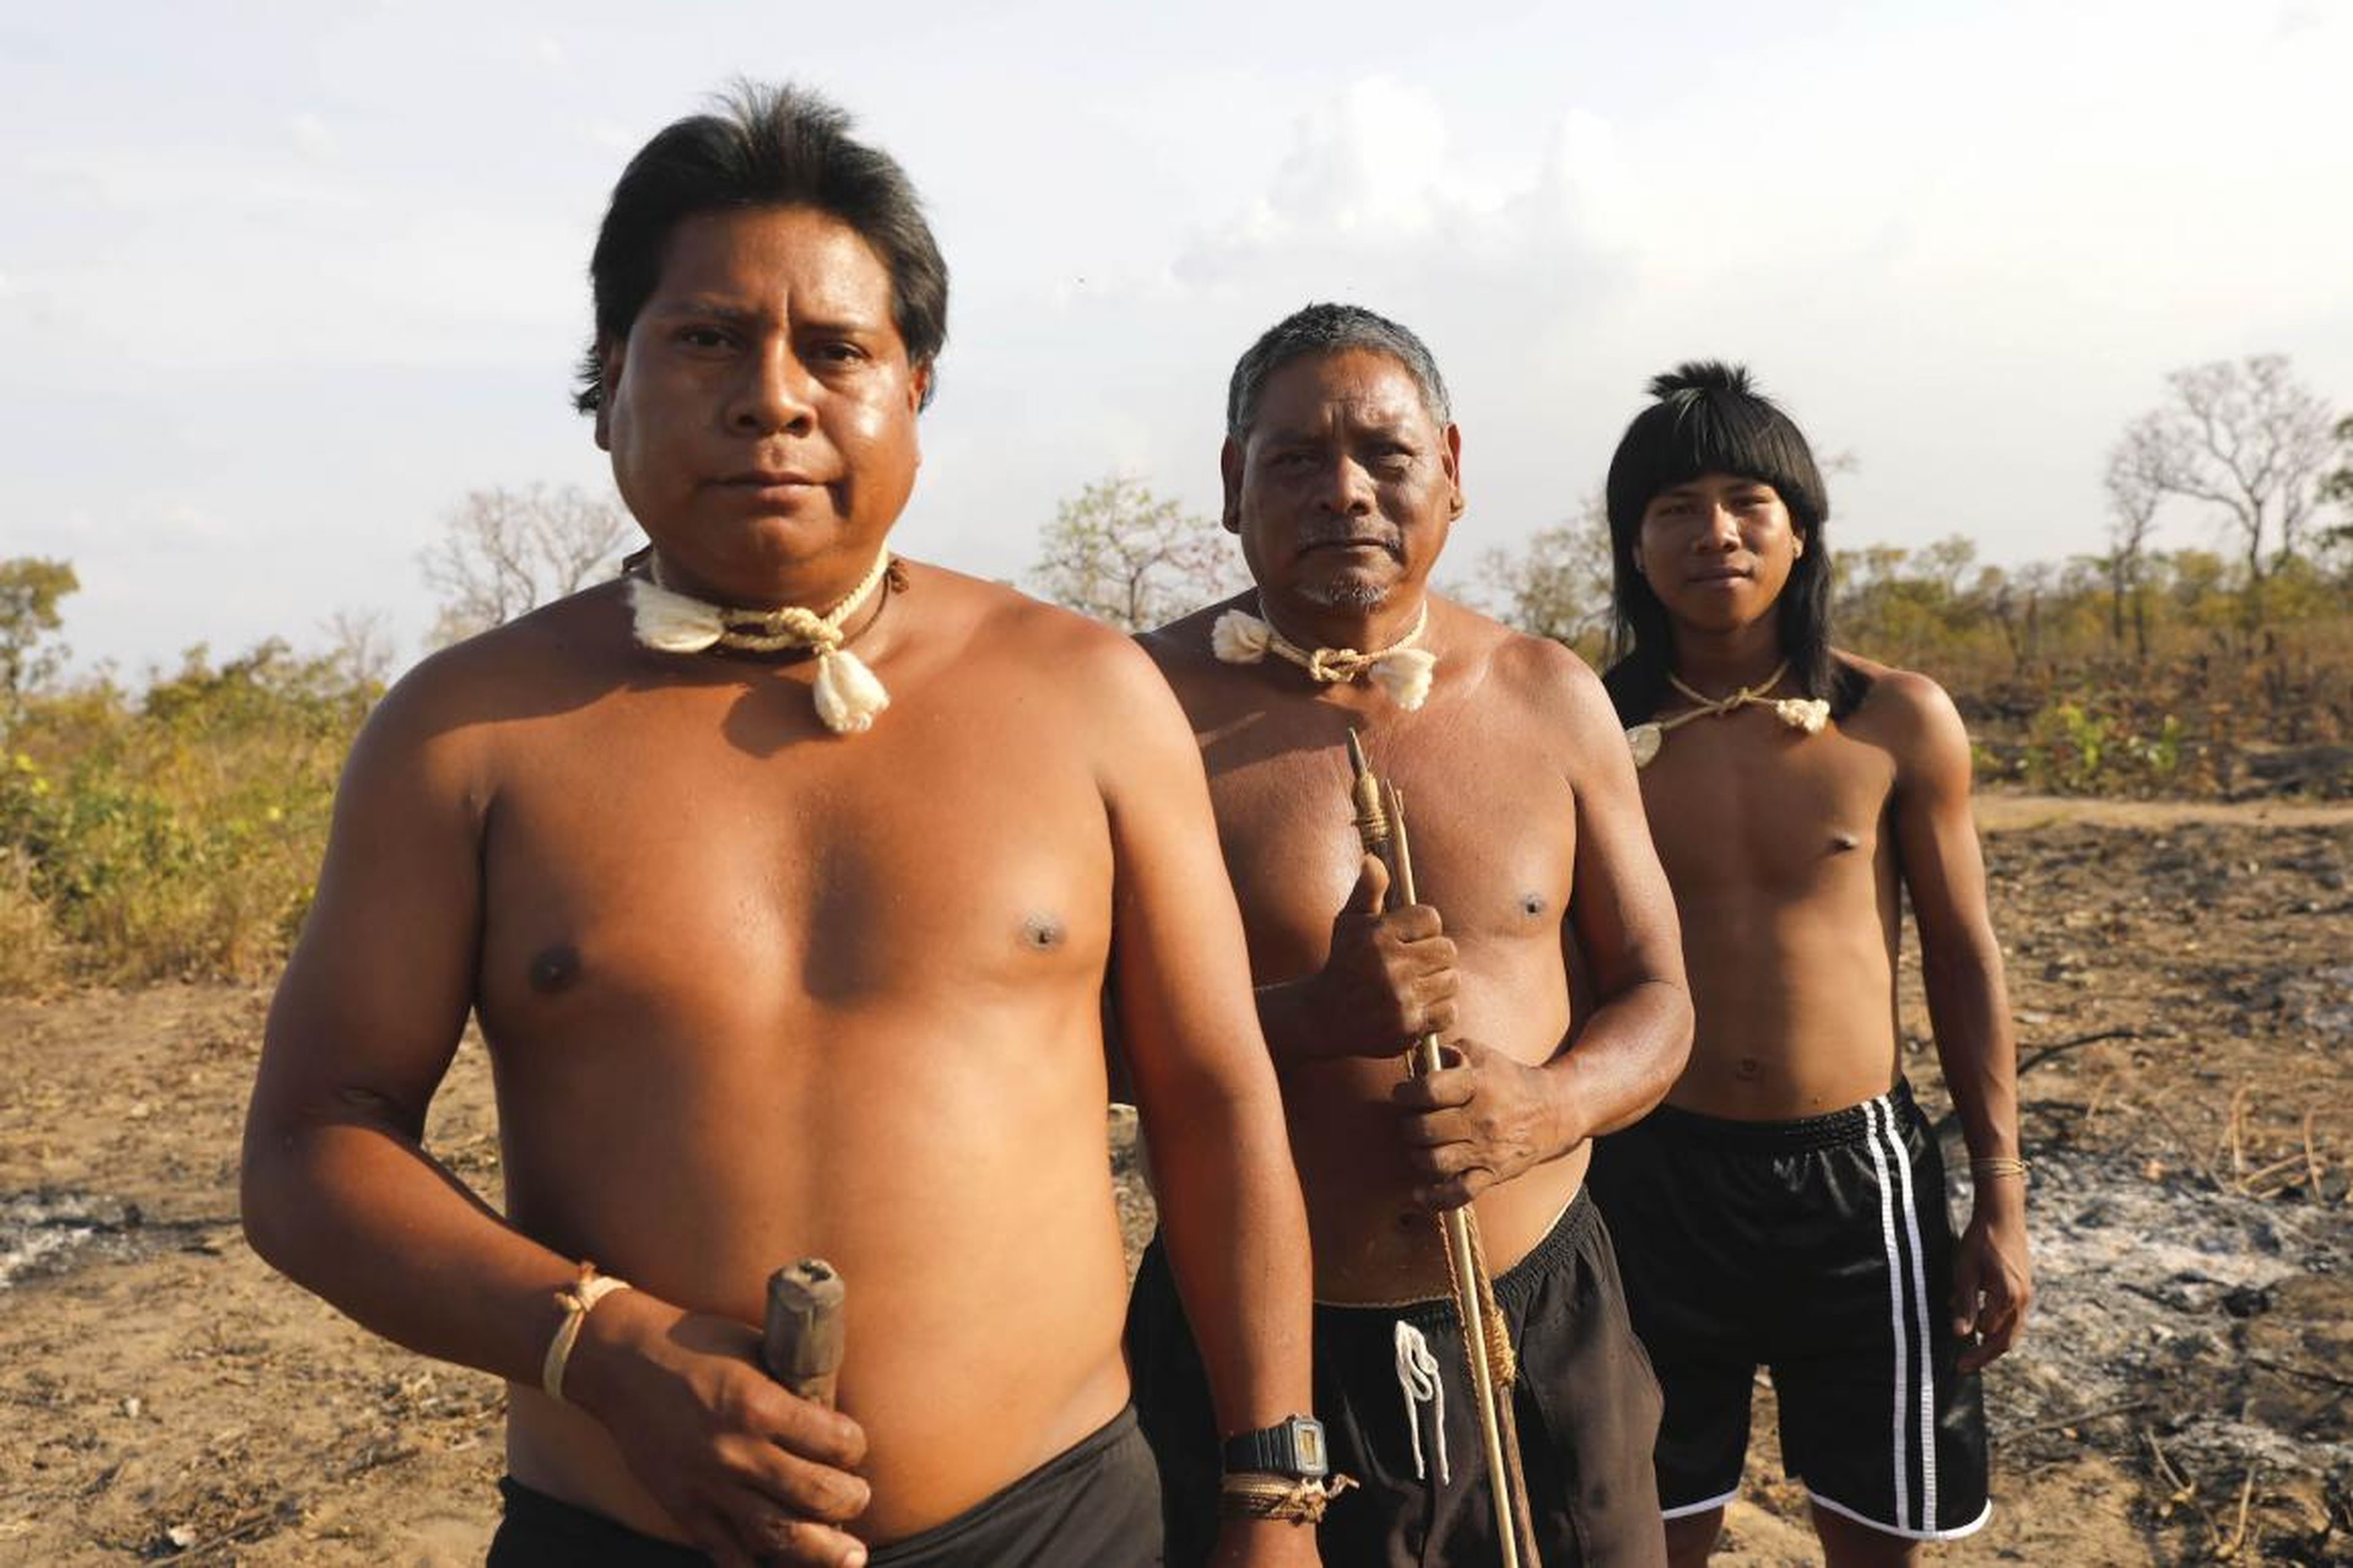 The Xavante have lived on this land for 200 years.